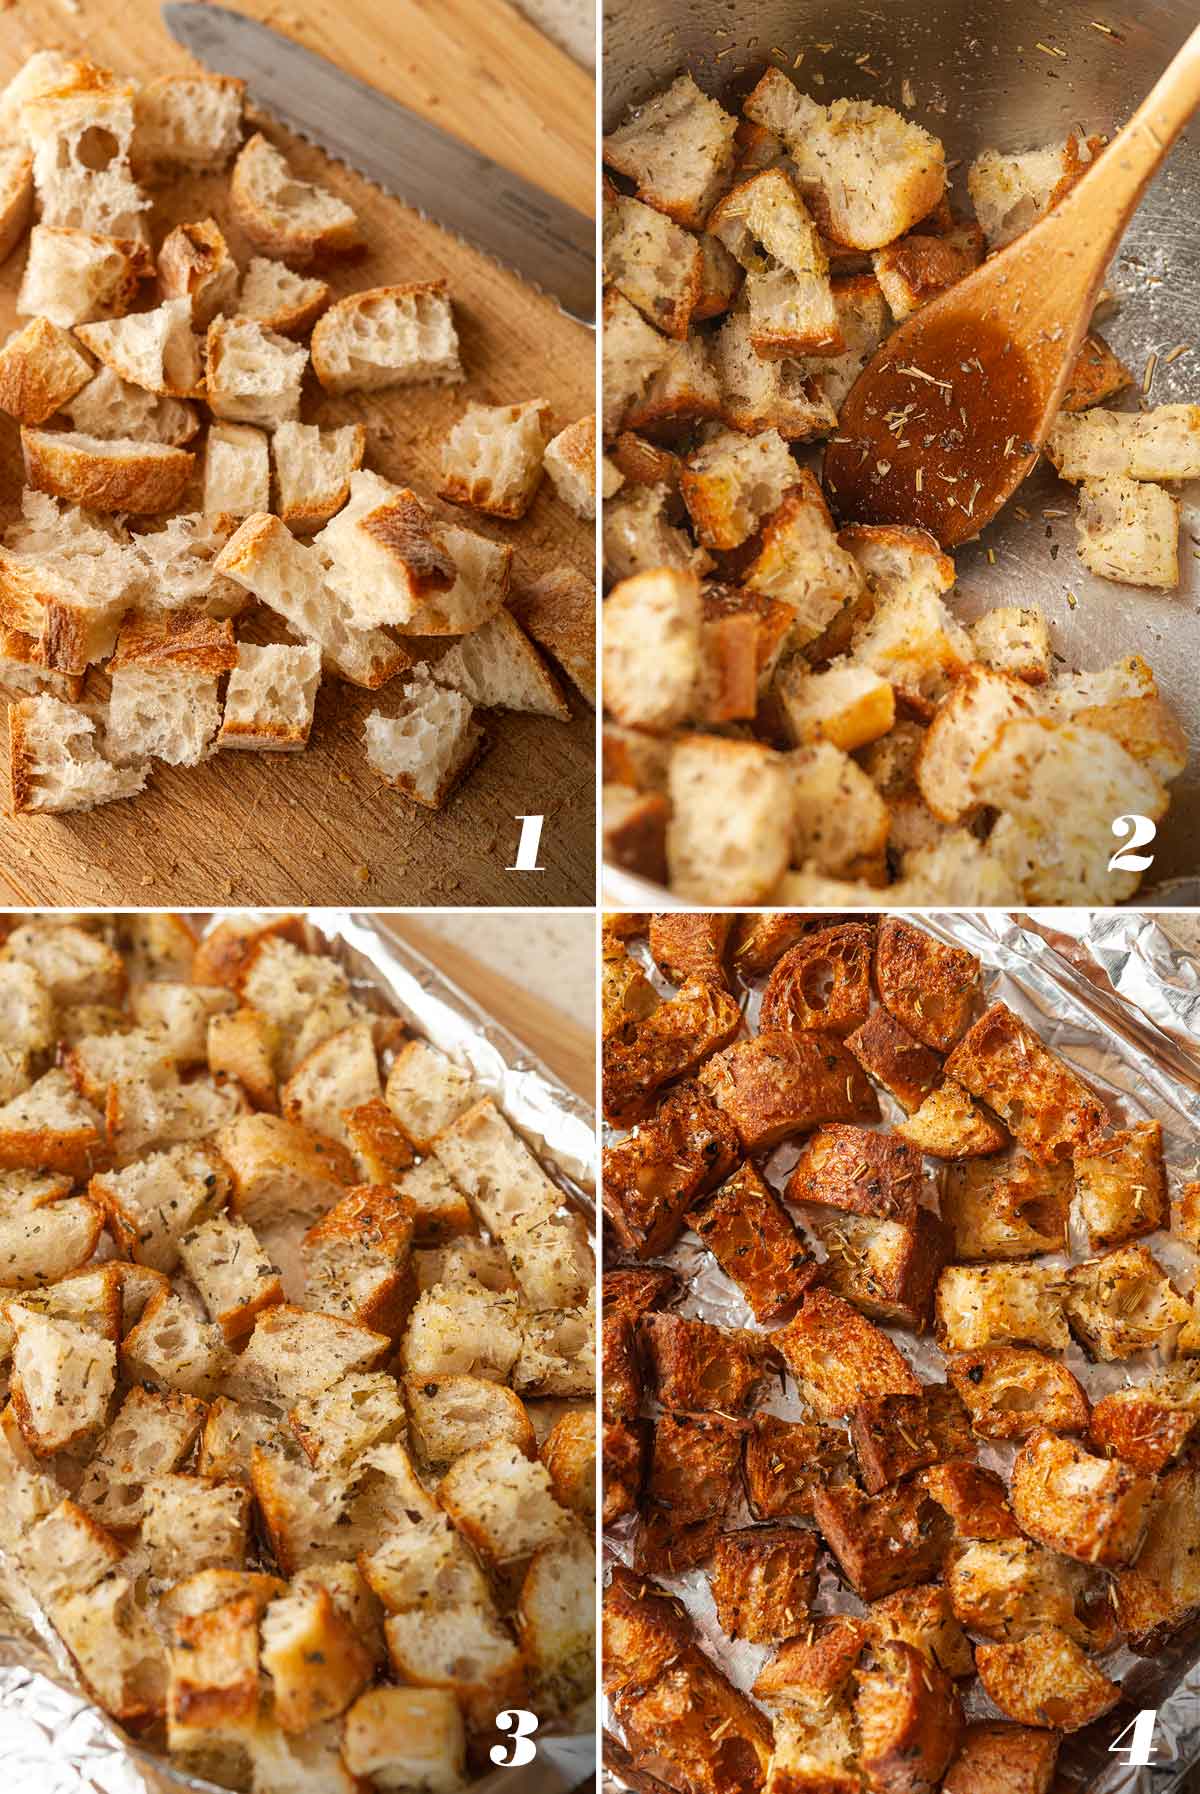 A collage of 4 numbered images showing how to make Italian croutons.